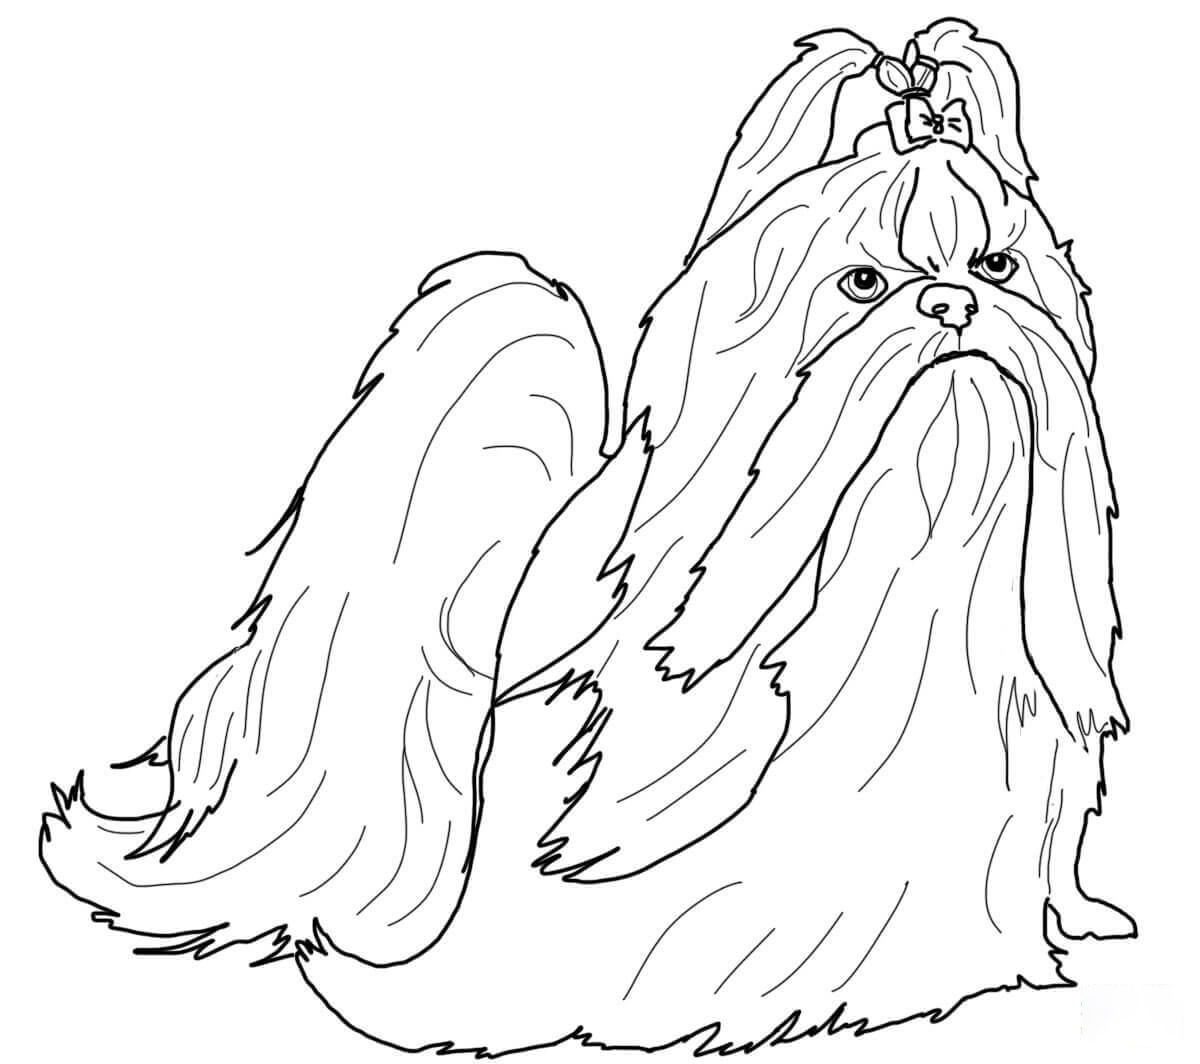 Shih Tzu With Pony Tail Coloring Pages